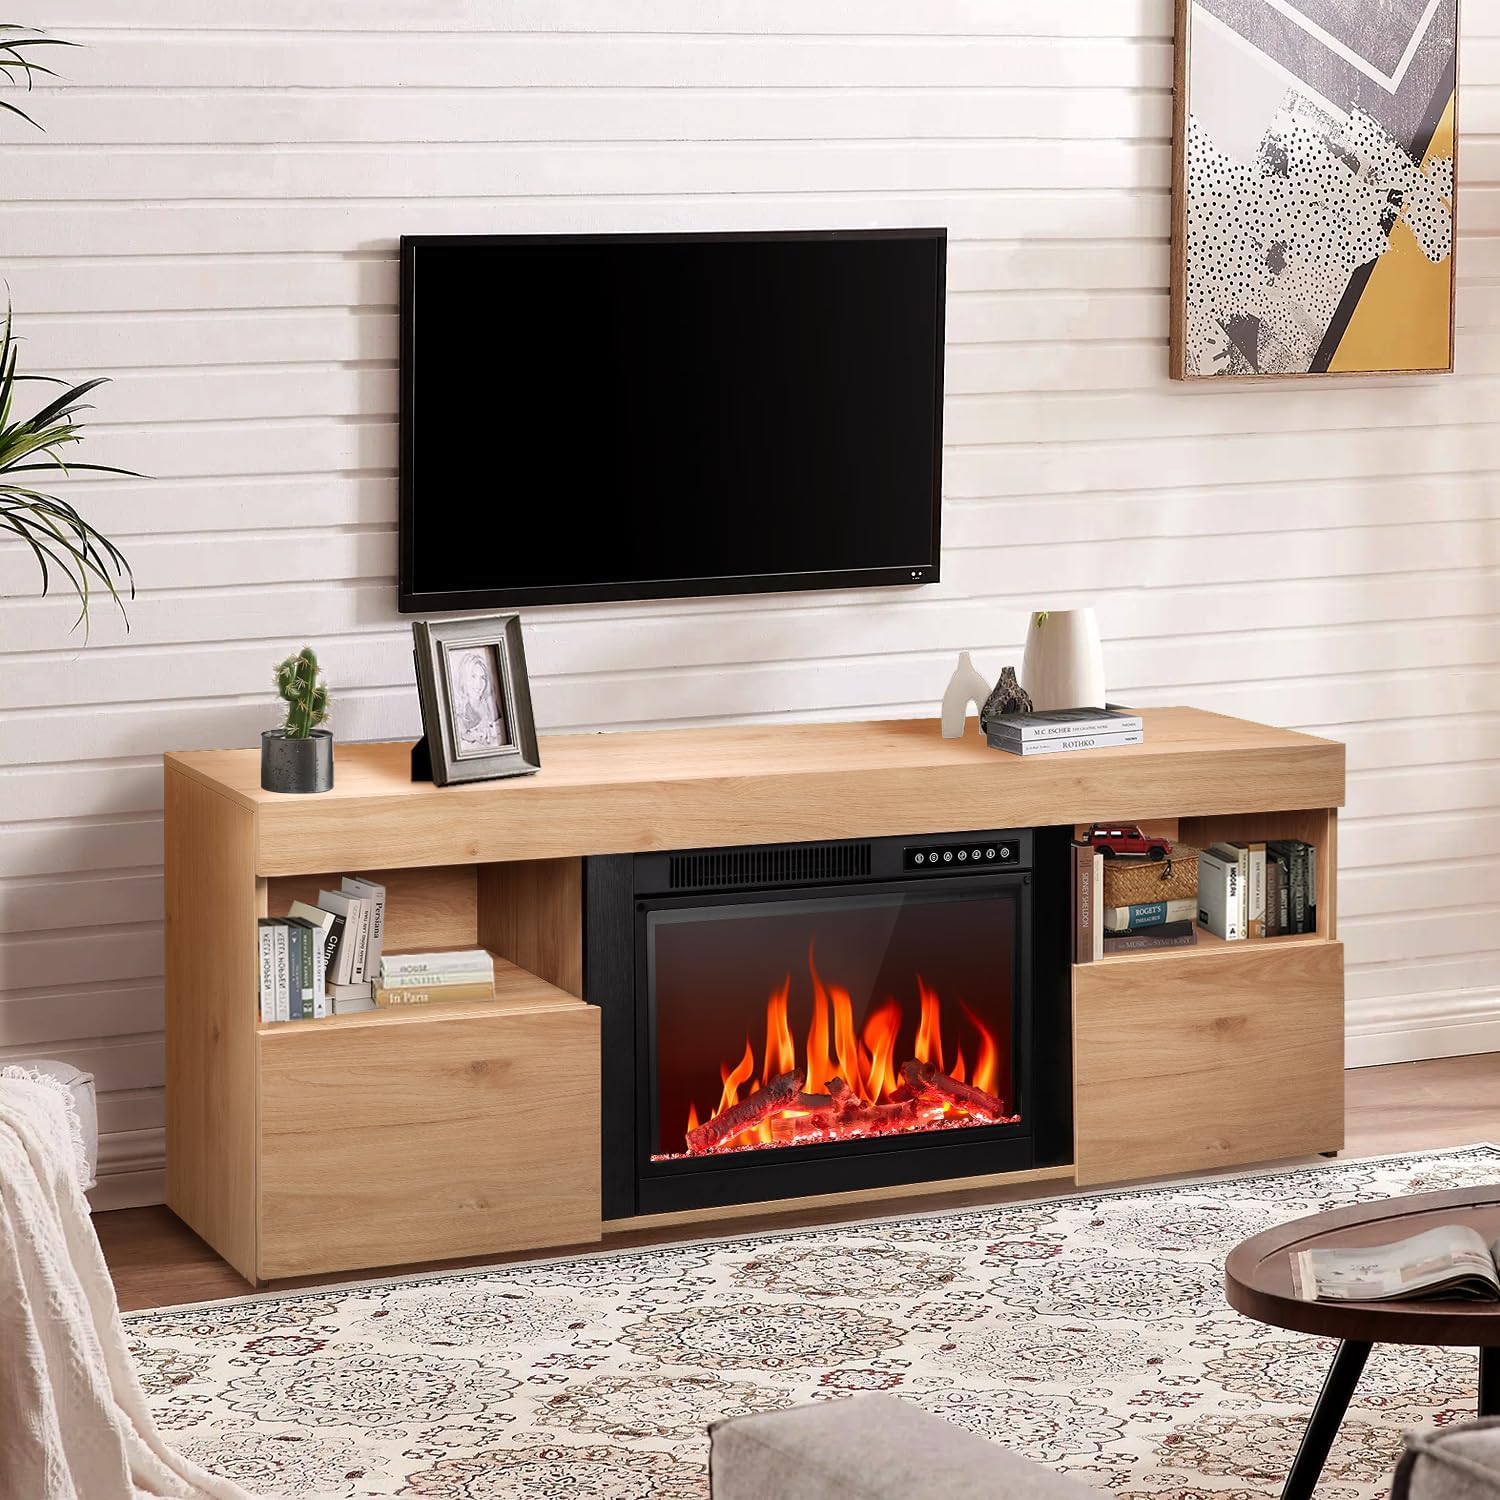 R.W.FLAME 59" Electric Fireplace Mantel TV Stand with Remote, Adjustable Flame, Timer, 750W-1500W